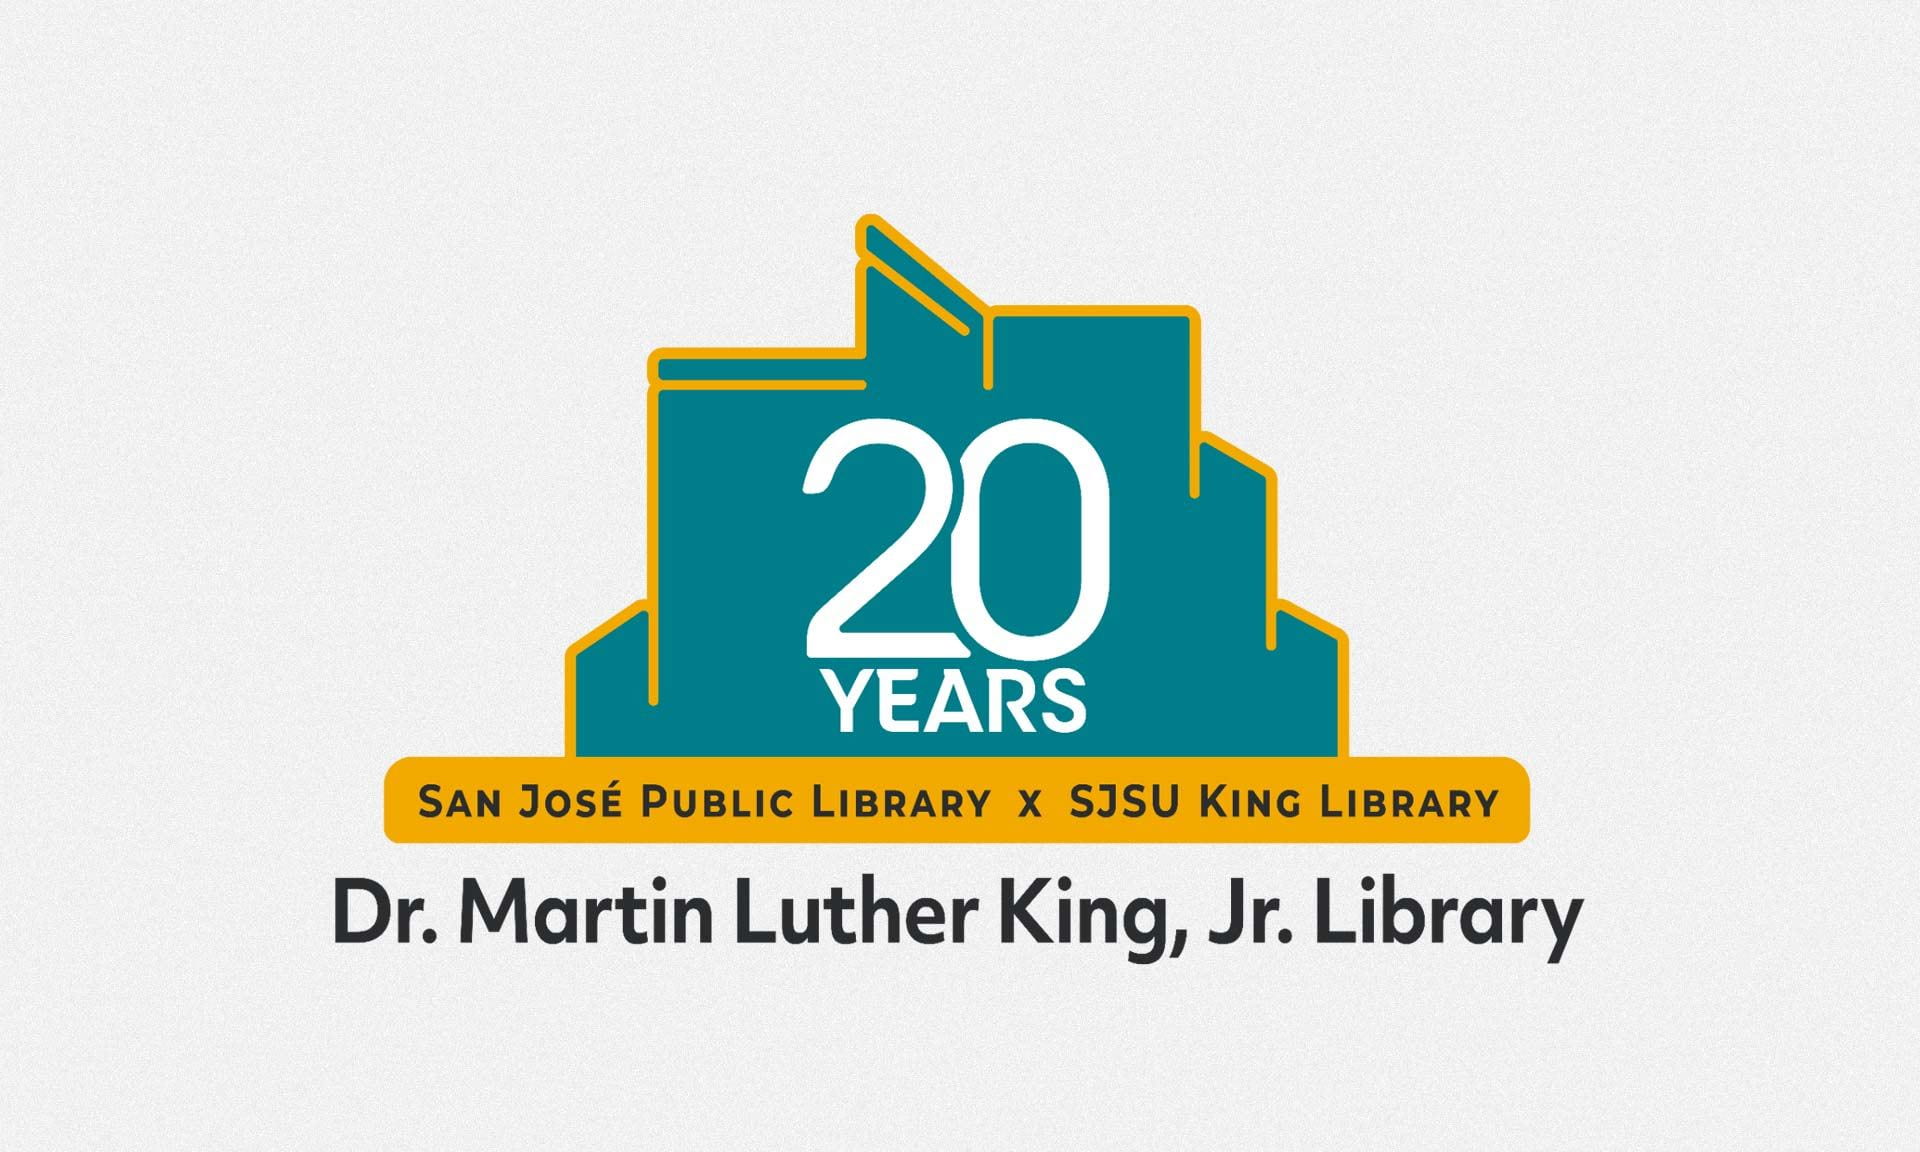 An illustration of the MLK Library building silhouette with the words 20 Years San Jose Public Library x SJSU King Library, Dr. Martin Luther King, Jr. Library.